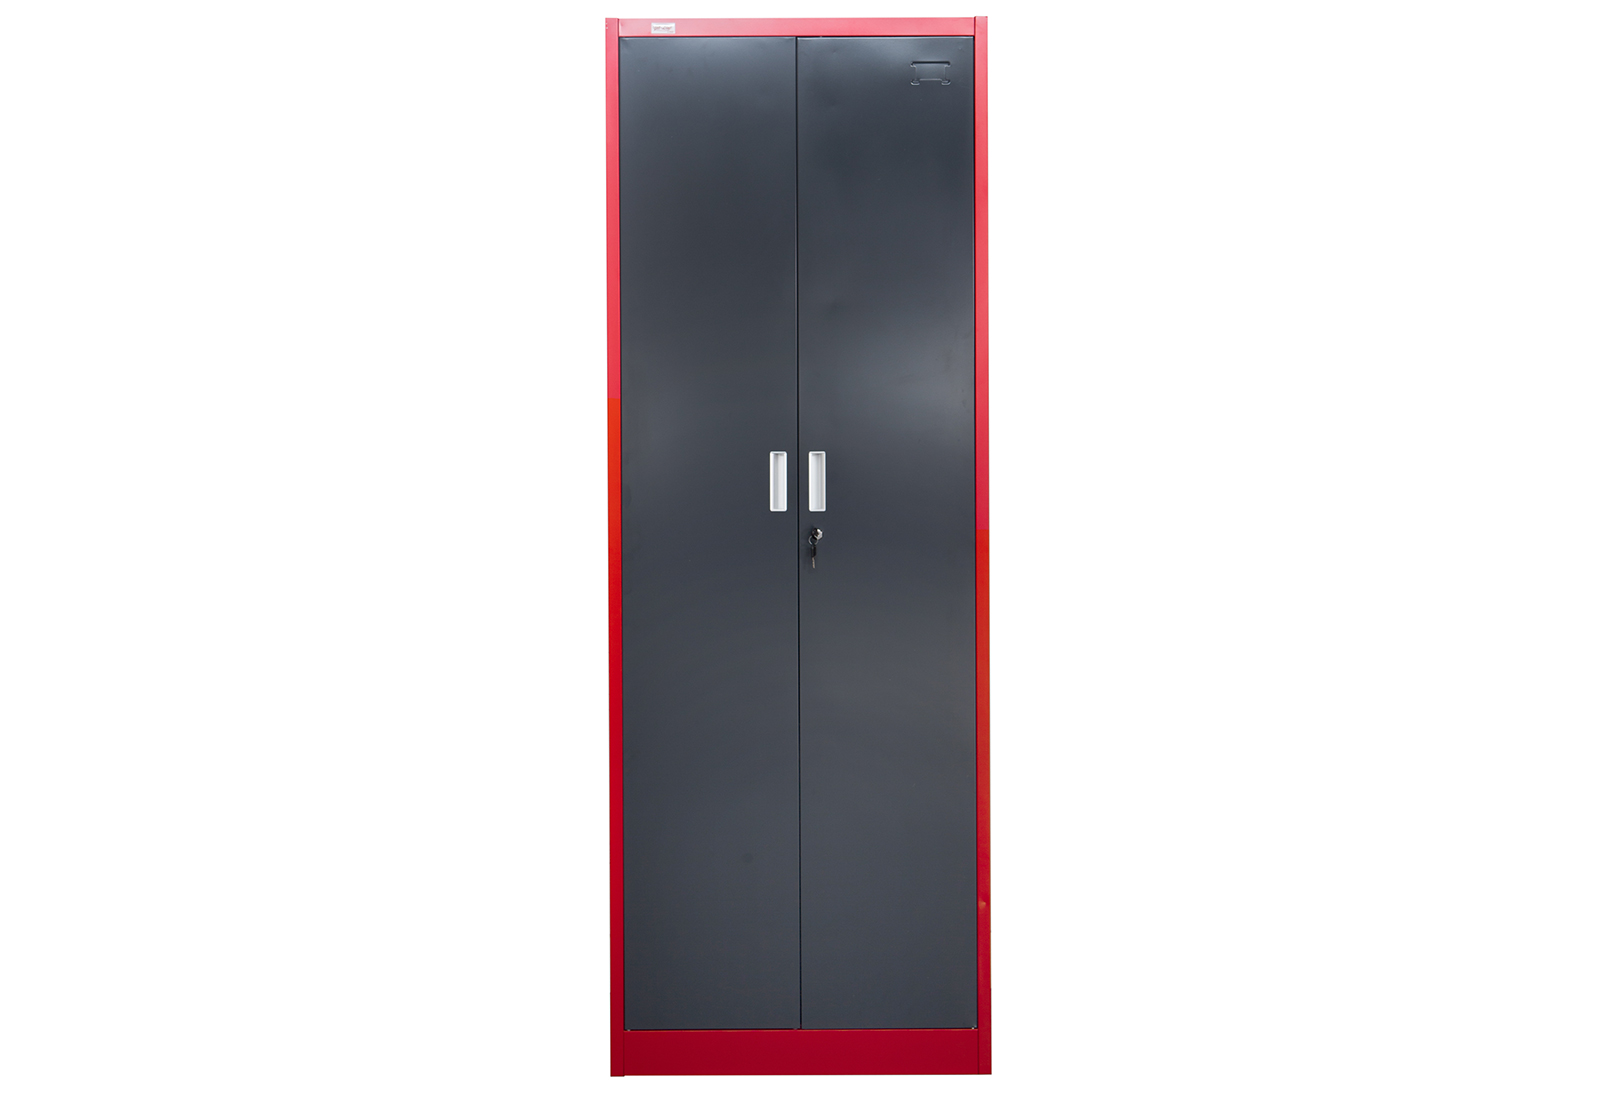 Steel Small-Part-Cabinet "Kirow", red/dark-gray